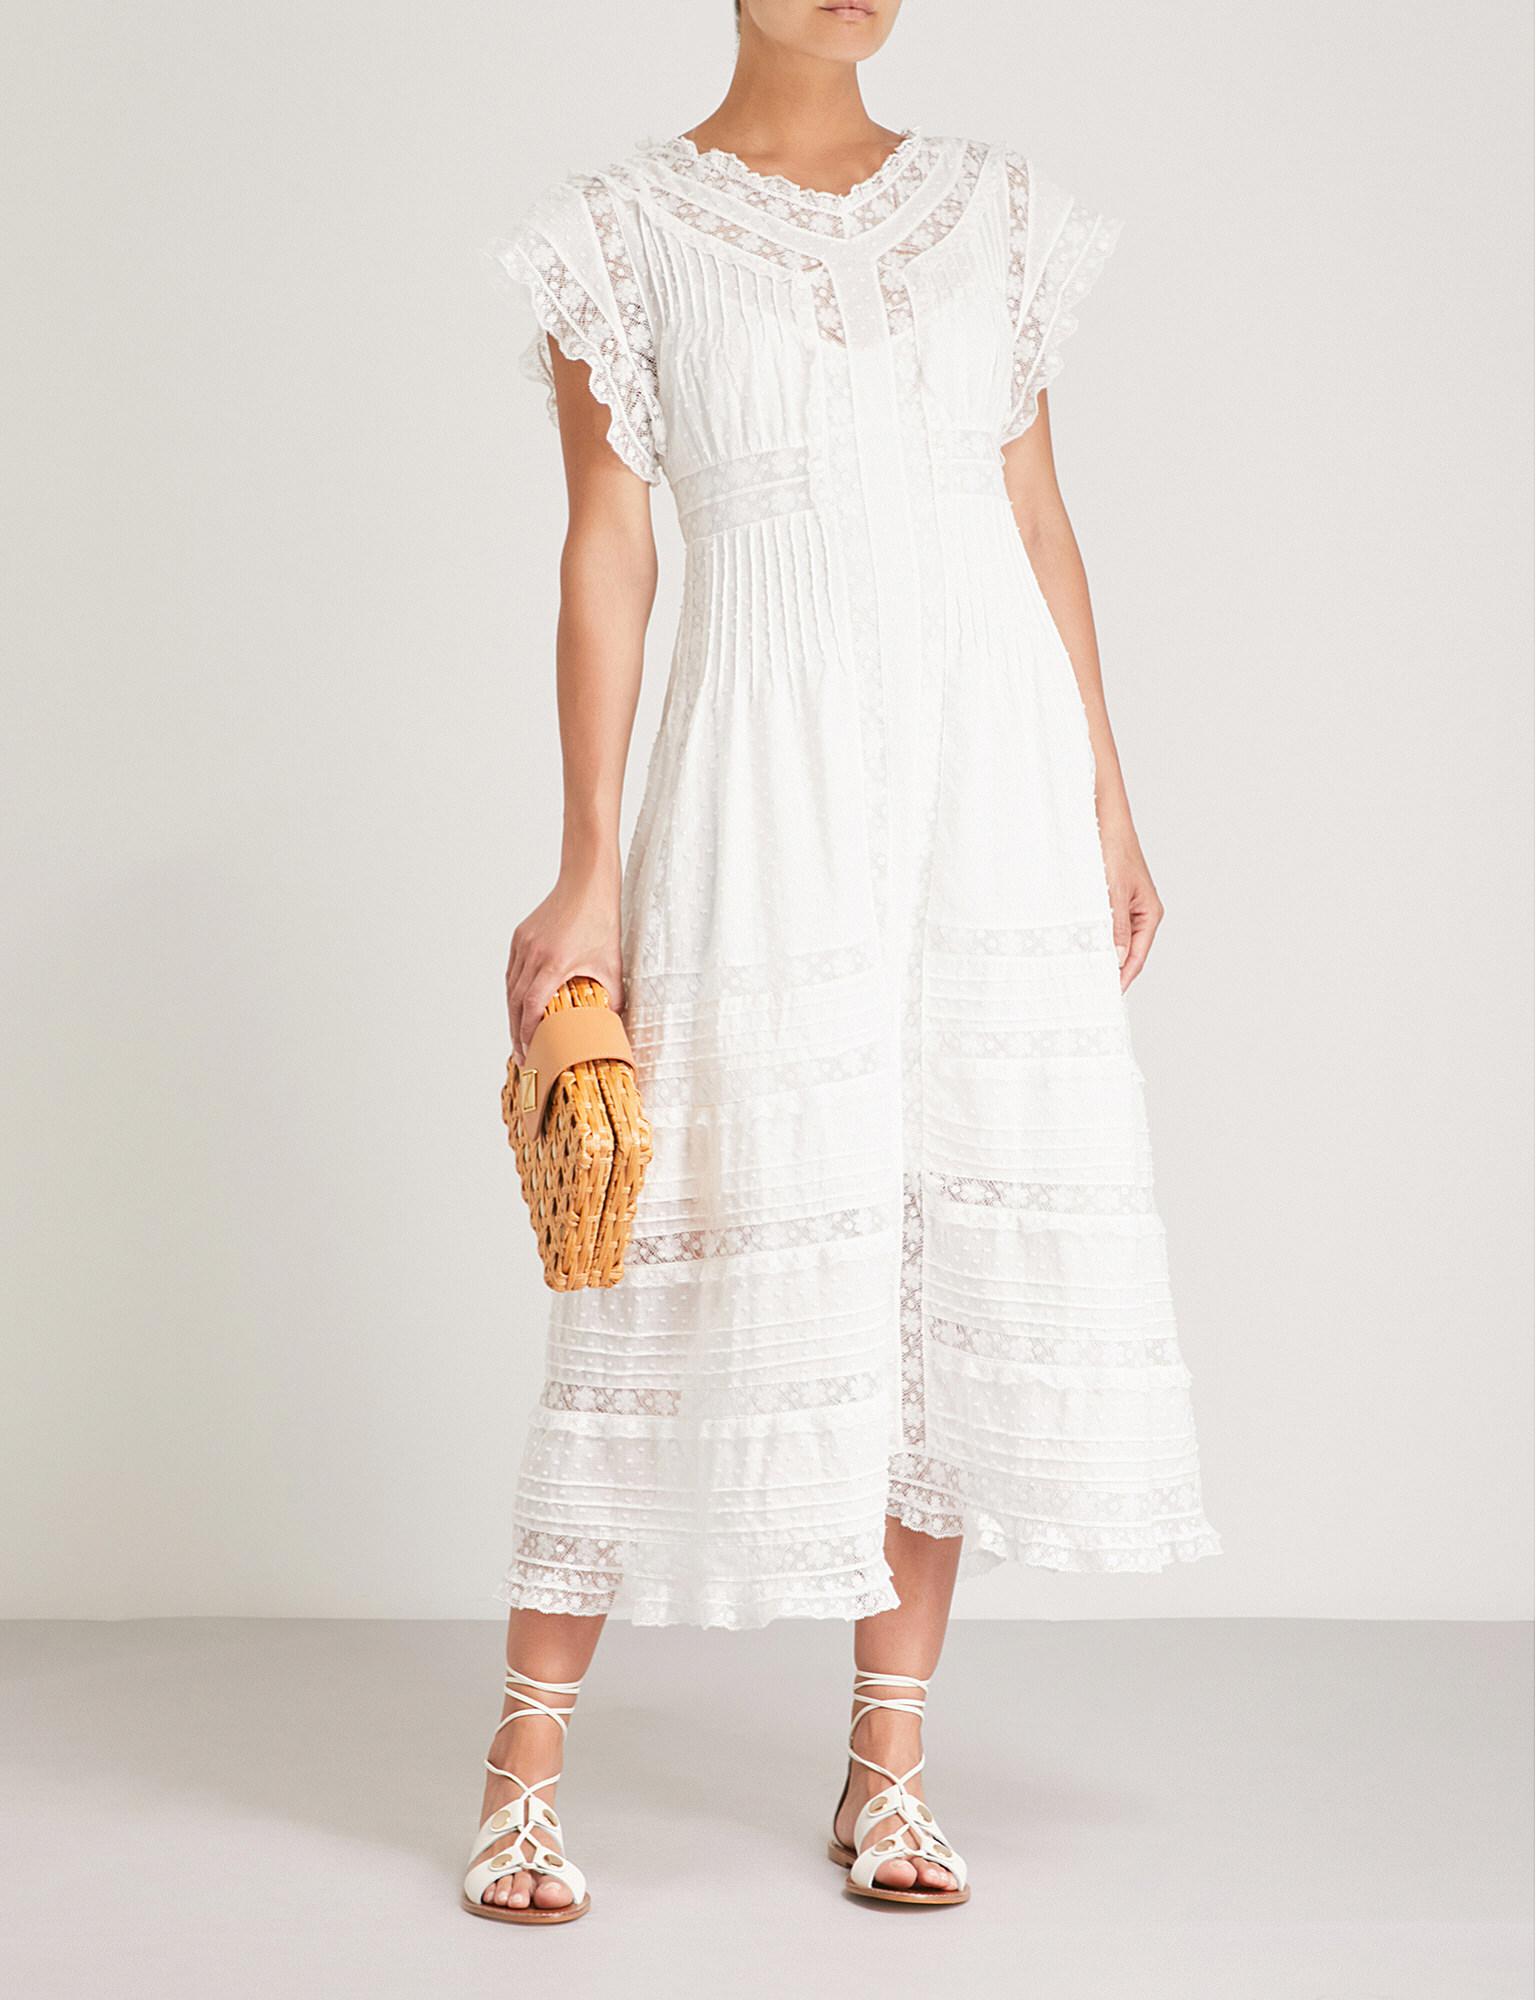 Zimmermann Iris Lace And Cotton Dress in White | Lyst